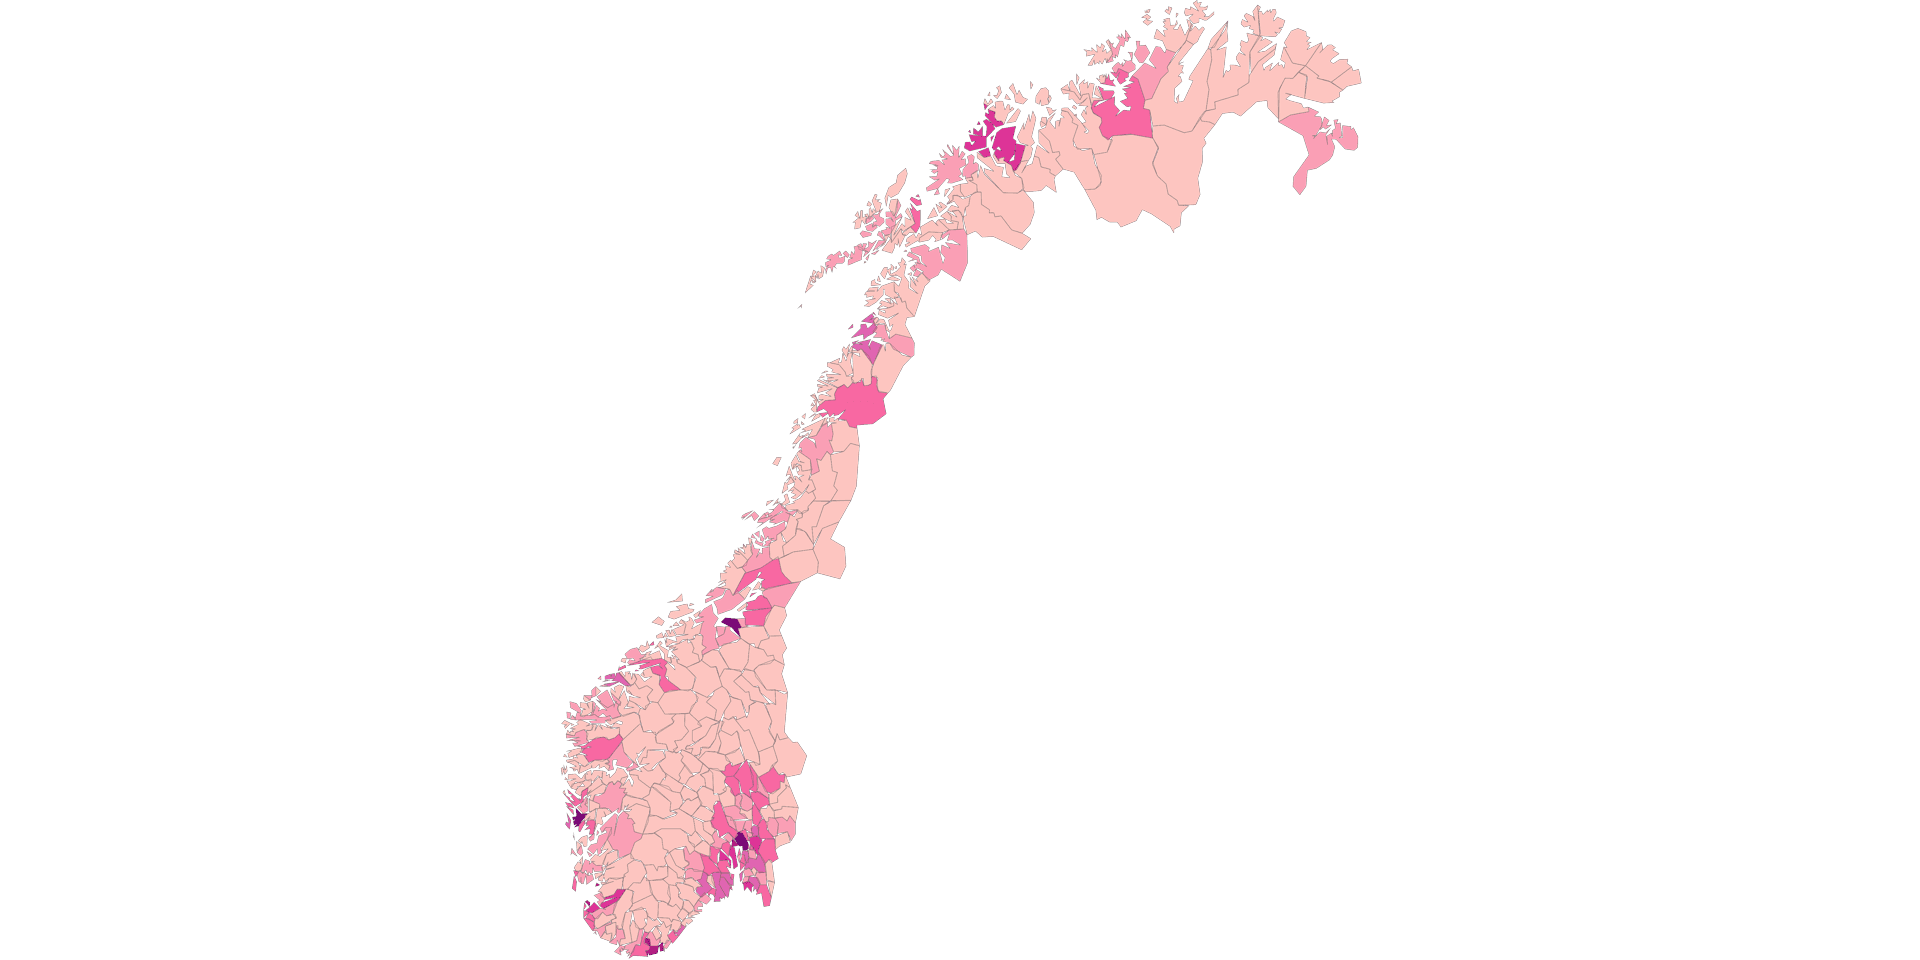 Population projections in Norway 2022-2050 by municipality